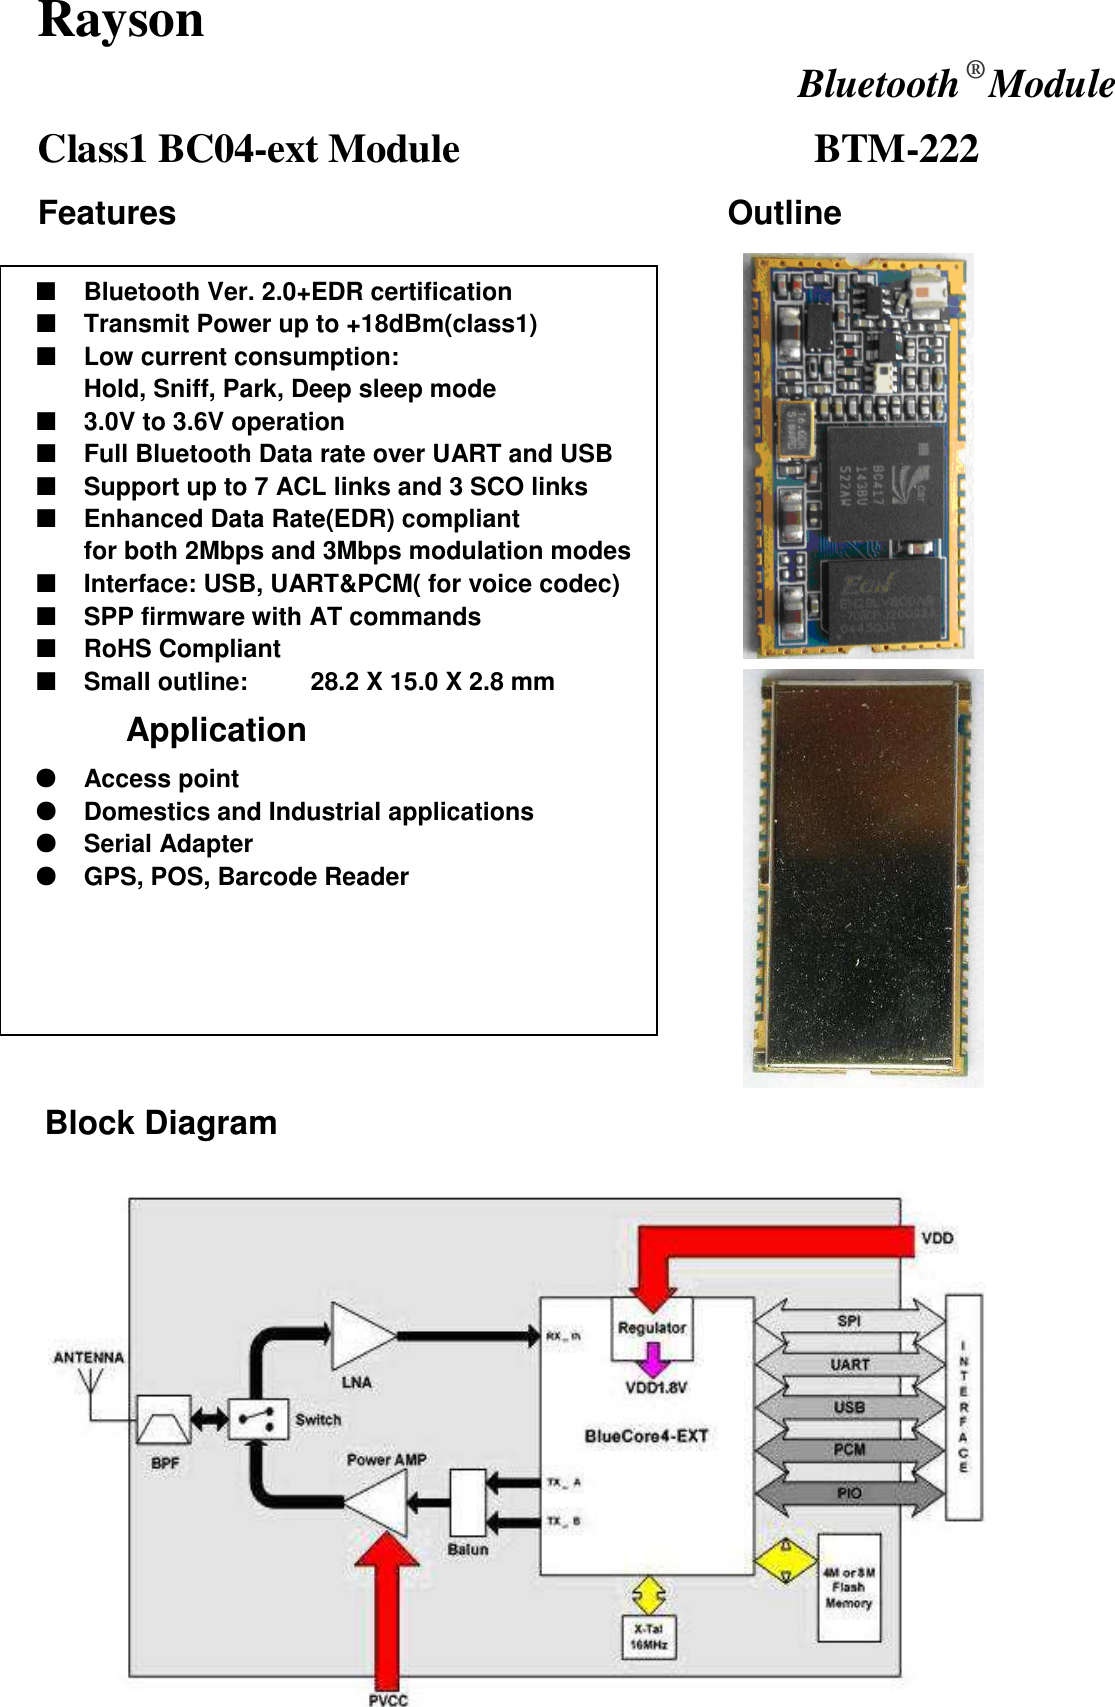 Rayson  Bluetooth ® Module Class1 BC04-ext Module                                     BTM-222 Features                                                                  Outline        Block Diagram   ■ Bluetooth Ver. 2.0+EDR certification ■ Transmit Power up to +18dBm(class1)   ■ Low current consumption: Hold, Sniff, Park, Deep sleep mode ■ 3.0V to 3.6V operation ■ Full Bluetooth Data rate over UART and USB ■ Support up to 7 ACL links and 3 SCO links ■ Enhanced Data Rate(EDR) compliant for both 2Mbps and 3Mbps modulation modes ■ Interface: USB, UART&amp;PCM( for voice codec) ■ SPP firmware with AT commands ■ RoHS Compliant ■ Small outline:          28.2 X 15.0 X 2.8 mm         Application    ● Access point ● Domestics and Industrial applications ● Serial Adapter ● GPS, POS, Barcode Reader 